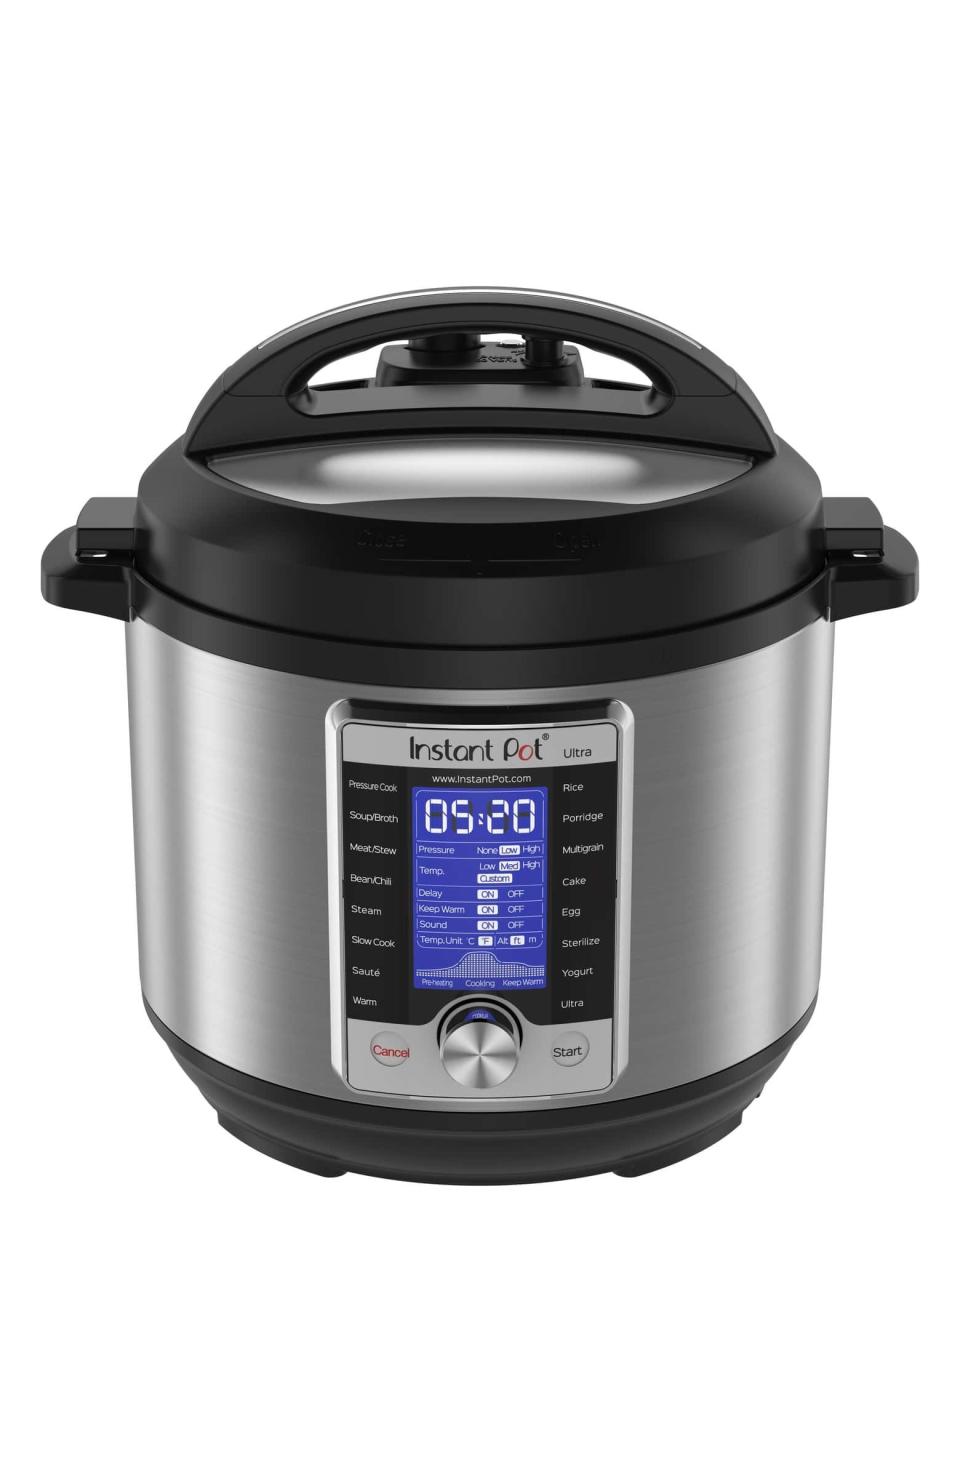 <strong>Regularly</strong>: $150&lt;br&gt;<br /><strong><a href="https://shop.nordstrom.com/s/instant-pot-ultra-6-quart-10-in-1-multiuse-programmable-cooker/5030143?country=US&amp;currency=USD&amp;lsft=mrkgcl:760,mrkgadid:3313969786,utm_content:44997669061,utm_term:pla-379397812485,utm_channel:shopping_ret_p,sp_source:google,sp_campaign:664982305,rkg_id:0,adpos:1o1,creative:231161220634,device:c,matchtype:,network:g&amp;gclid=EAIaIQobChMIgs_RpIvf3gIVhIrICh1hfw6WEAQYASABEgJw_fD_BwE" target="_blank" rel="noopener noreferrer">Black Friday: $150 and free shipping</a></strong>&lt;br&gt;<a href="https://shop.nordstrom.com/s/instant-pot-ultra-6-quart-10-in-1-multiuse-programmable-cooker/5030143?country=US&amp;currency=USD&amp;lsft=mrkgcl:760,mrkgadid:3313969786,utm_content:44997669061,utm_term:pla-379397812485,utm_channel:shopping_ret_p,sp_source:google,sp_campaign:664982305,rkg_id:0,adpos:1o1,creative:231161220634,device:c,matchtype:,network:g&amp;gclid=EAIaIQobChMIgs_RpIvf3gIVhIrICh1hfw6WEAQYASABEgJw_fD_BwE">﻿</a><br />(Savings: $0)&lt;br&gt;<br /> <i>Nordstrom has yet to release their Black Friday deals, but shoppers can expect to save up to 40 percent off on select home goods</i>